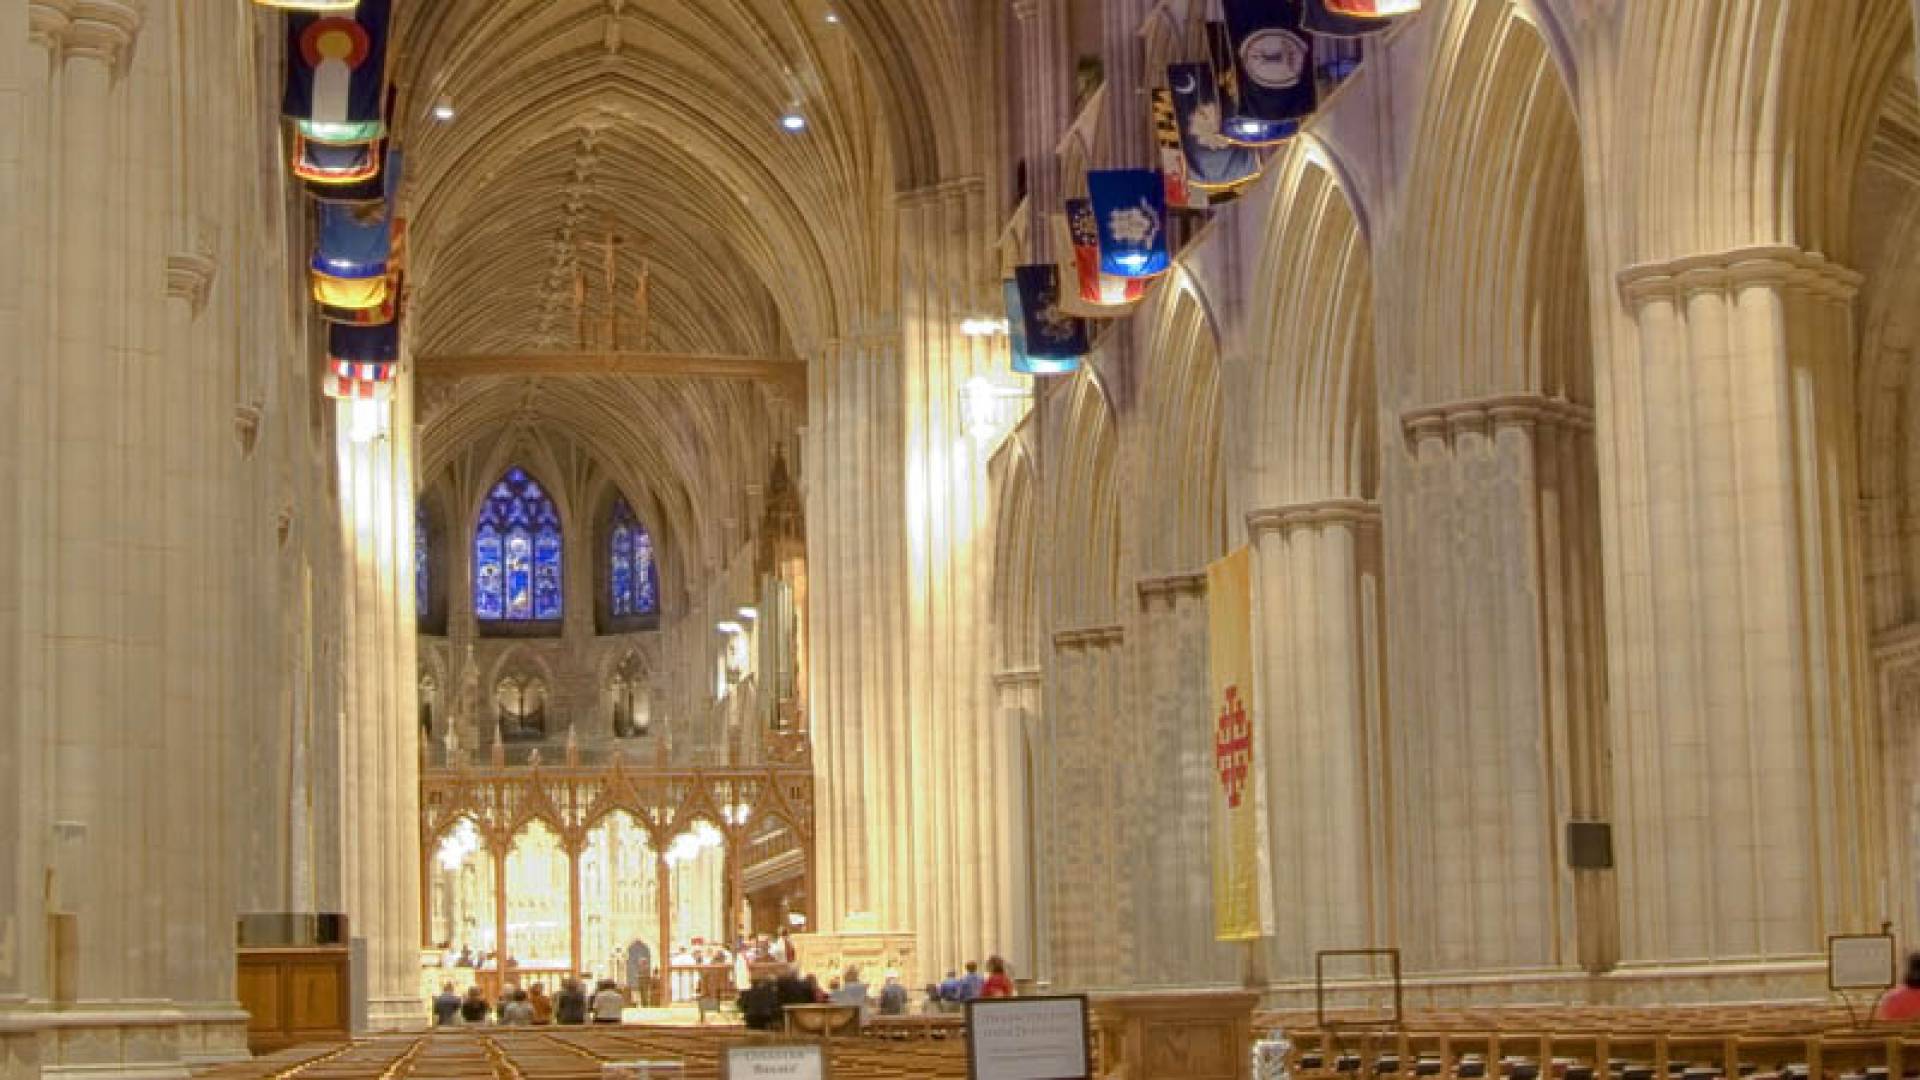 NATIONAL CATHEDRAL, Temple Of Music